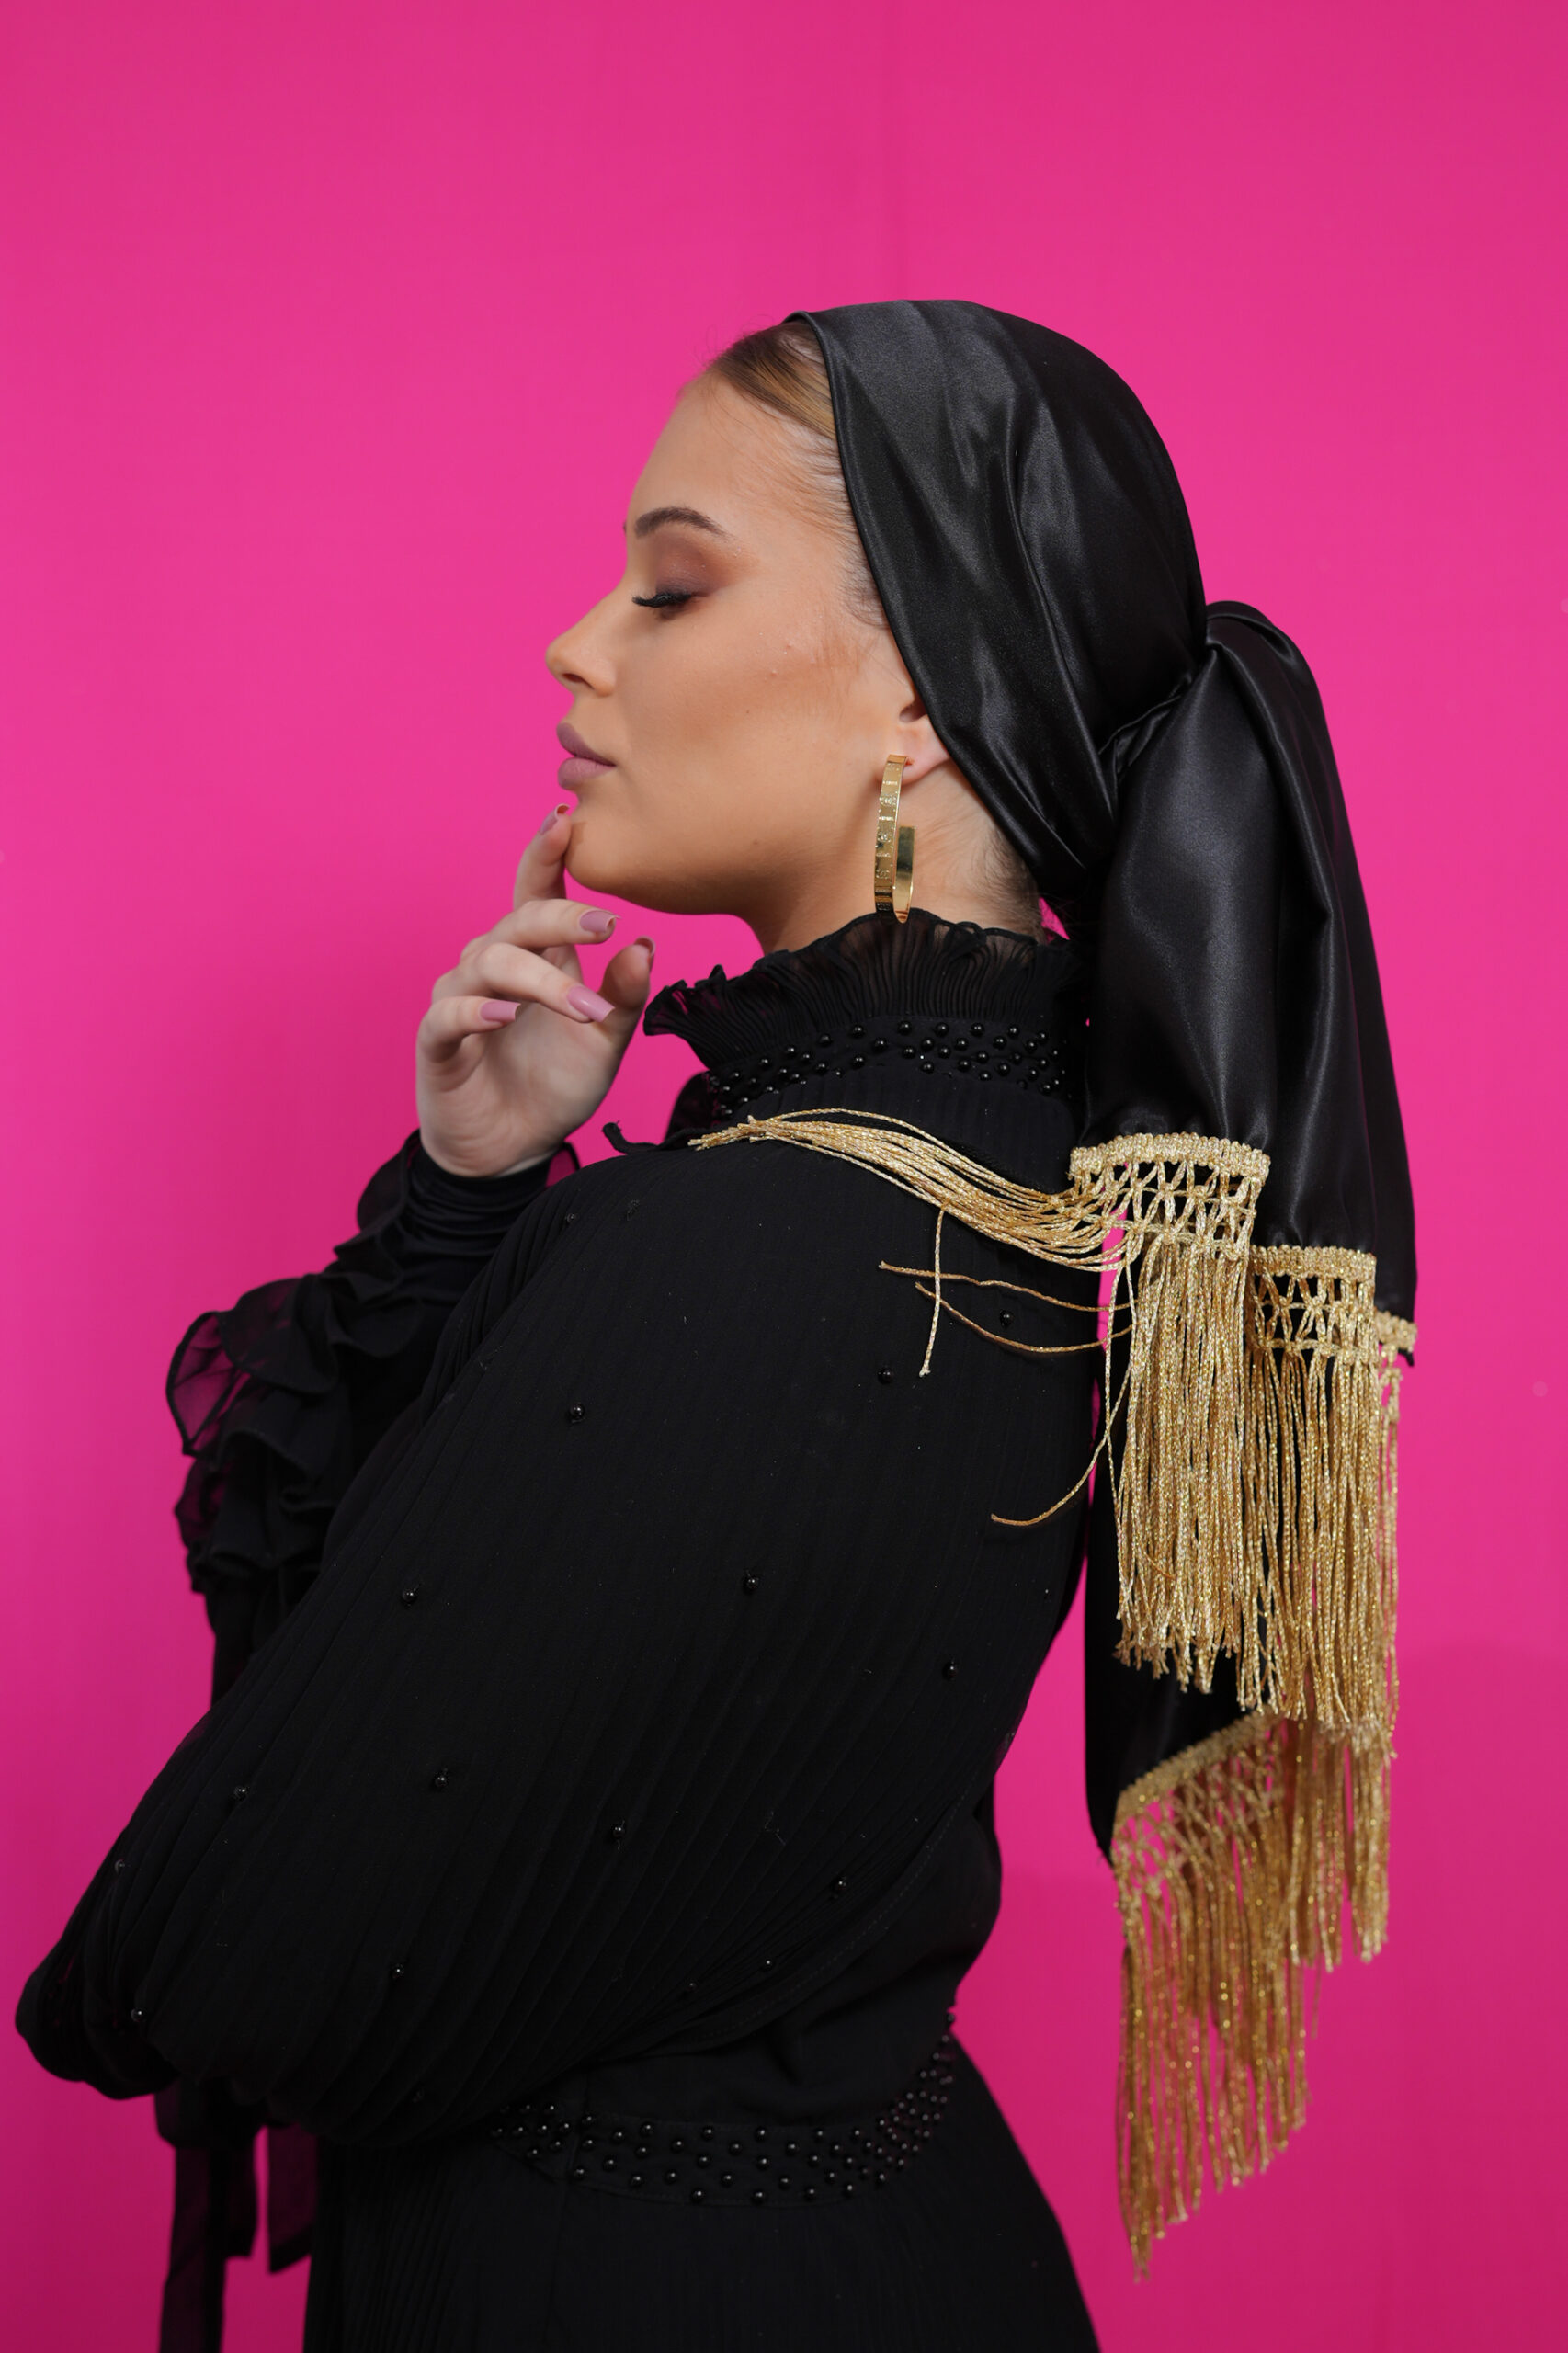 Black satin headscarf with Gold fringes